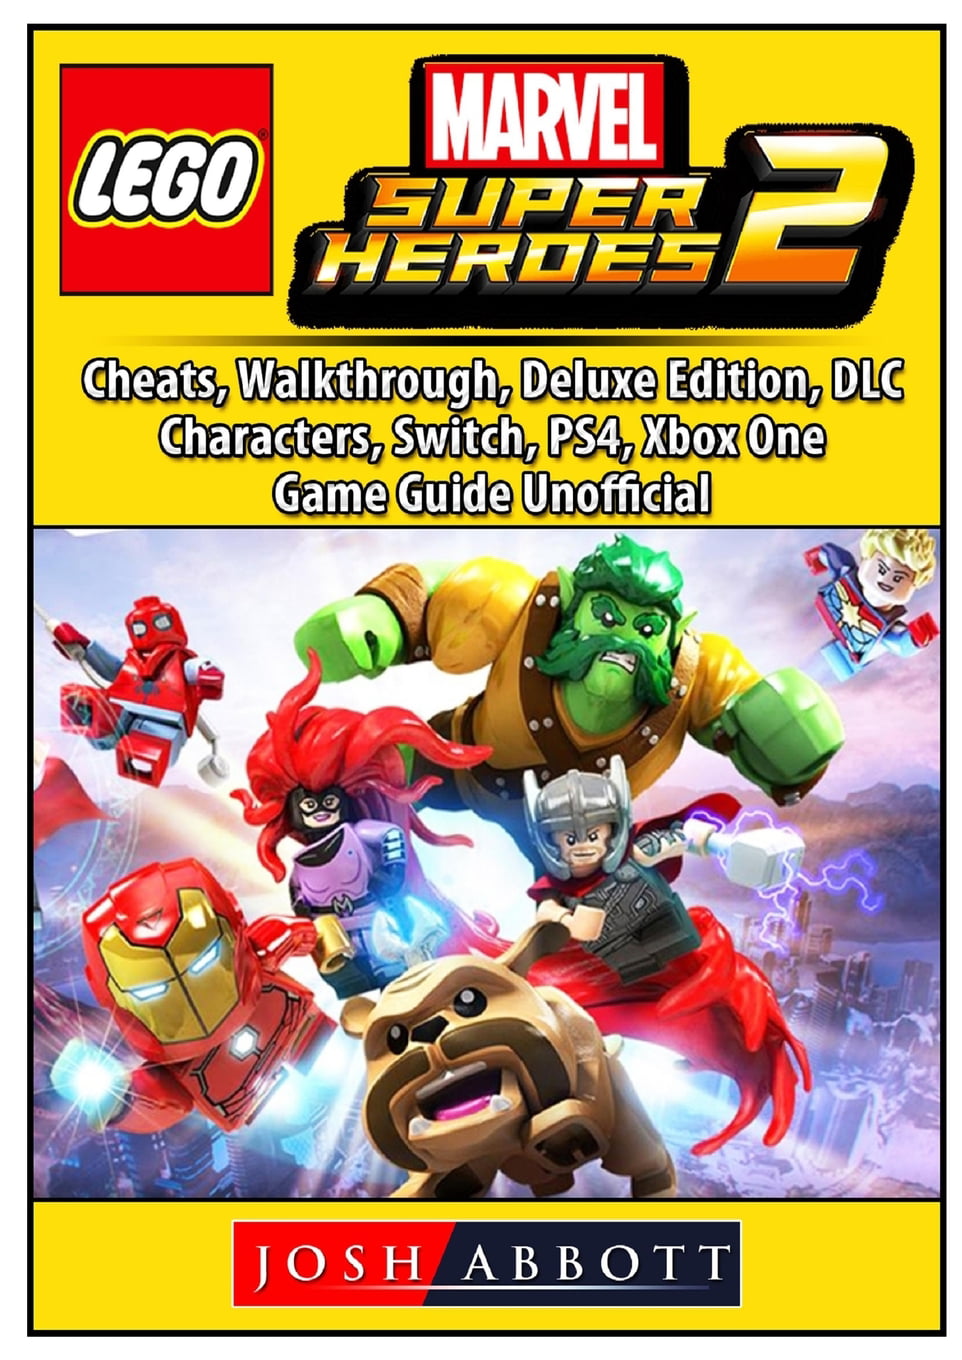 Lego Super Heroes 2, Cheats, Walkthrough, Deluxe Edition, DLC, Characters, Switch, PS4, Xbox Game Guide - Walmart.com